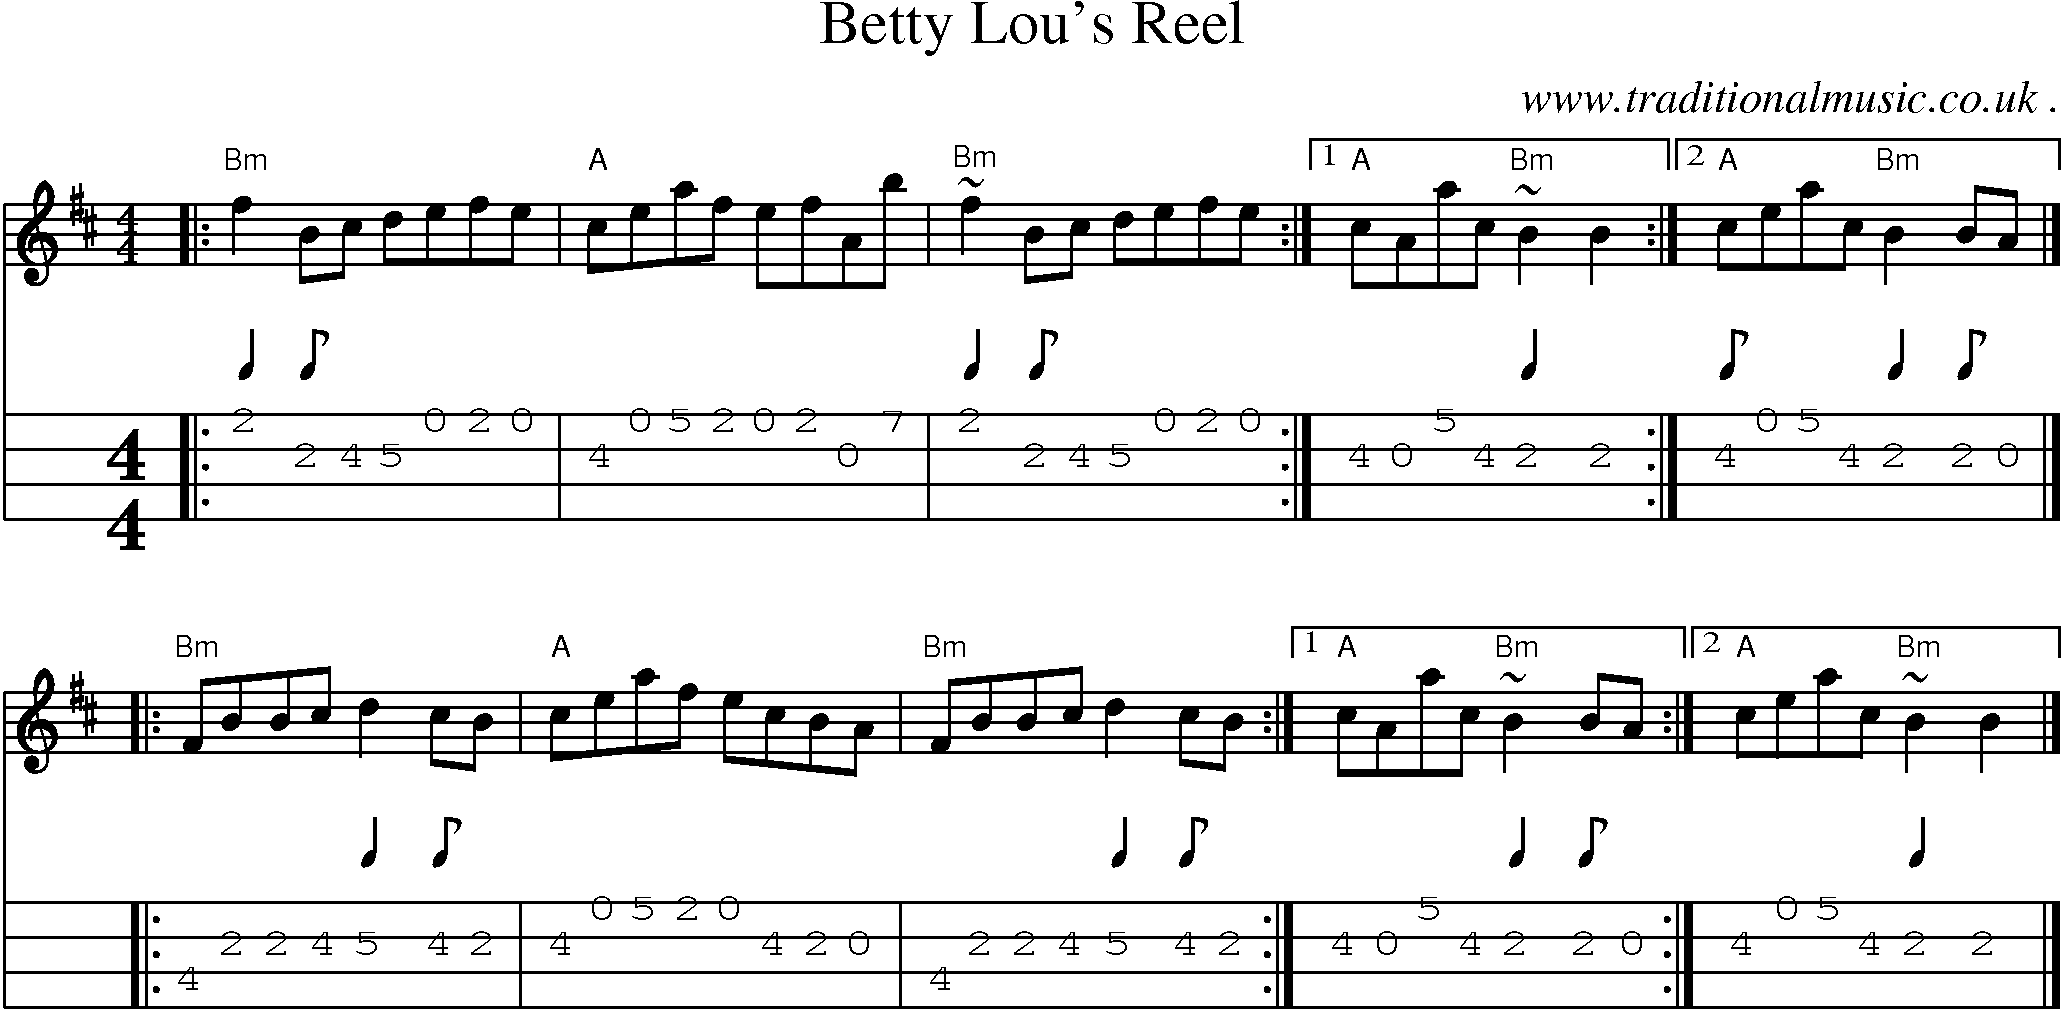 Sheet-music  score, Chords and Mandolin Tabs for Betty Lous Reel